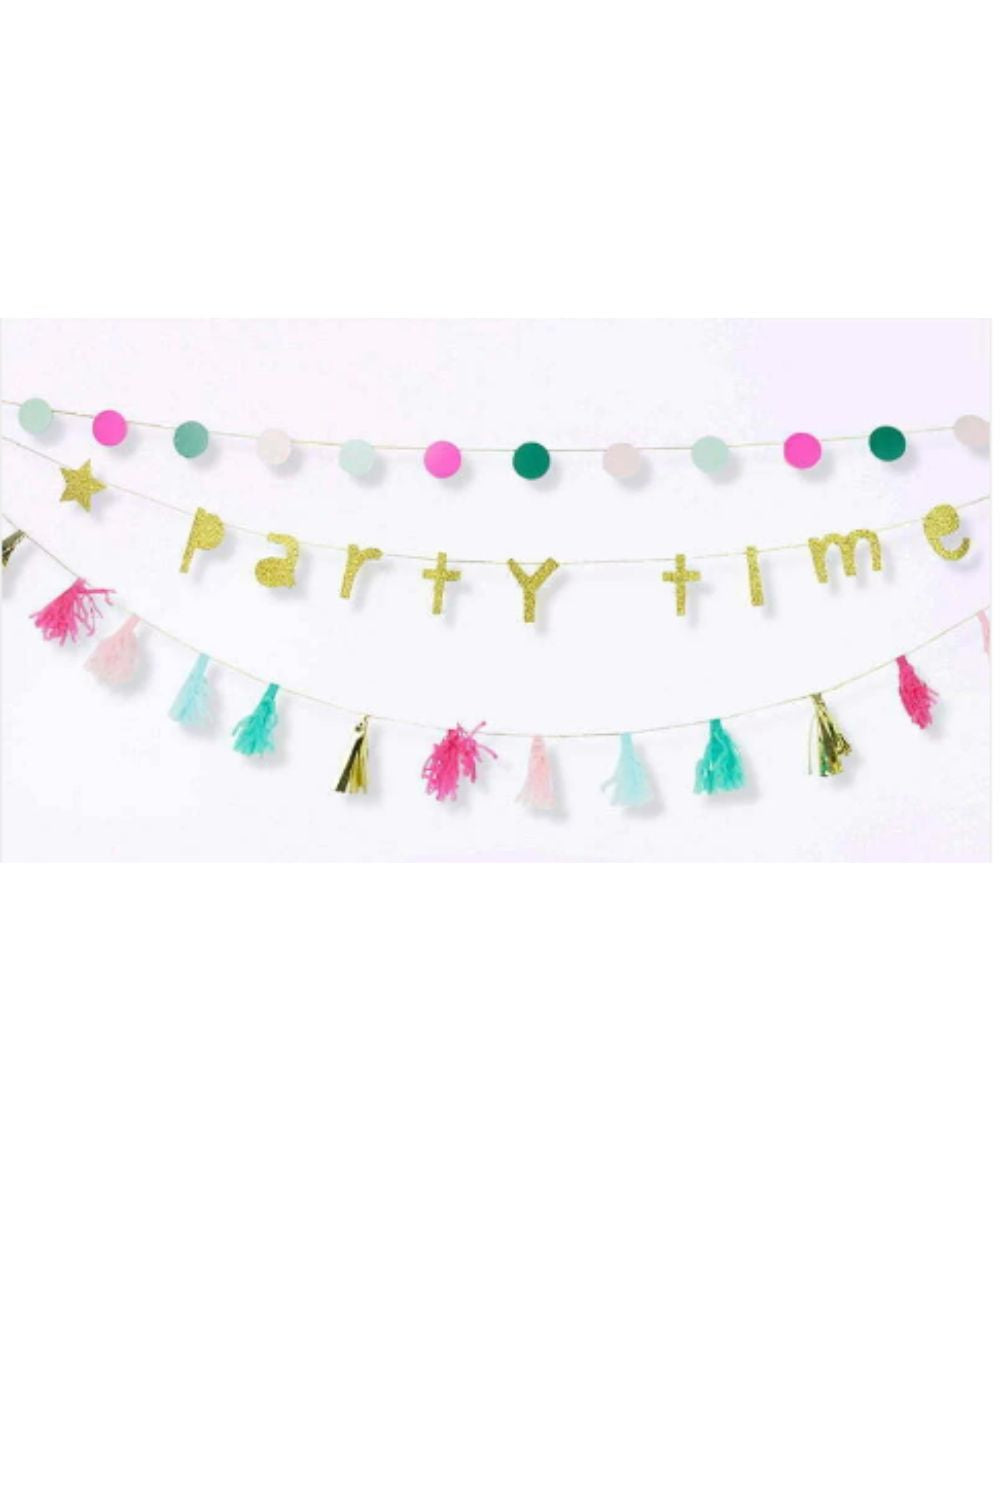 Party Time Garland